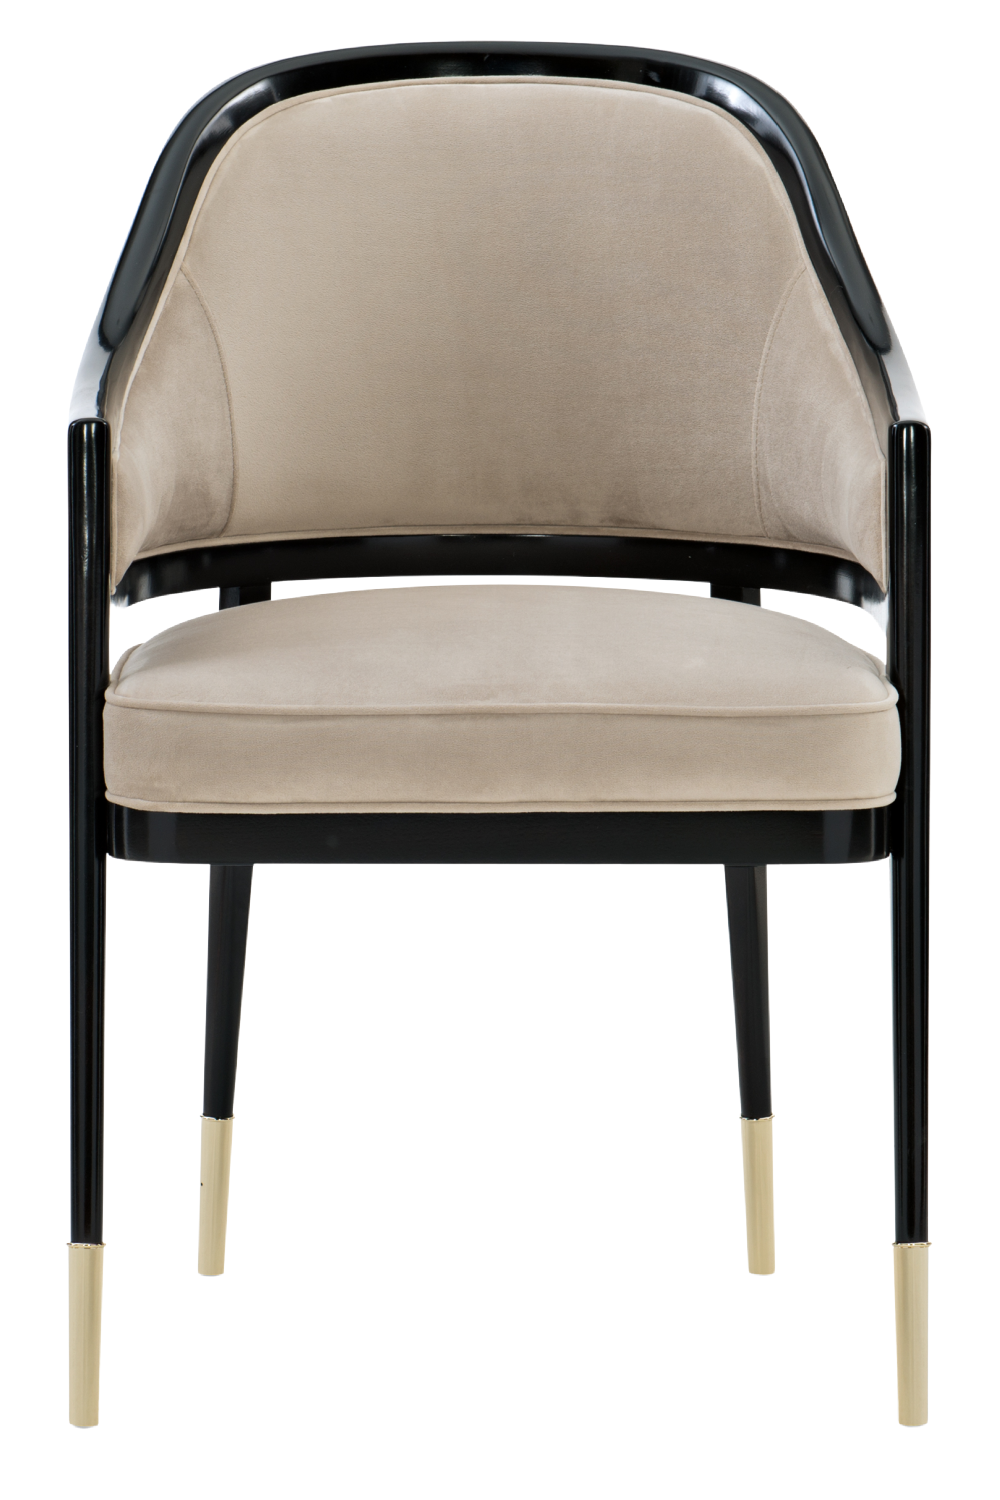 Arabesque Fretwork Dining Chair | Caracole Club Member At The Table | Oroa.com